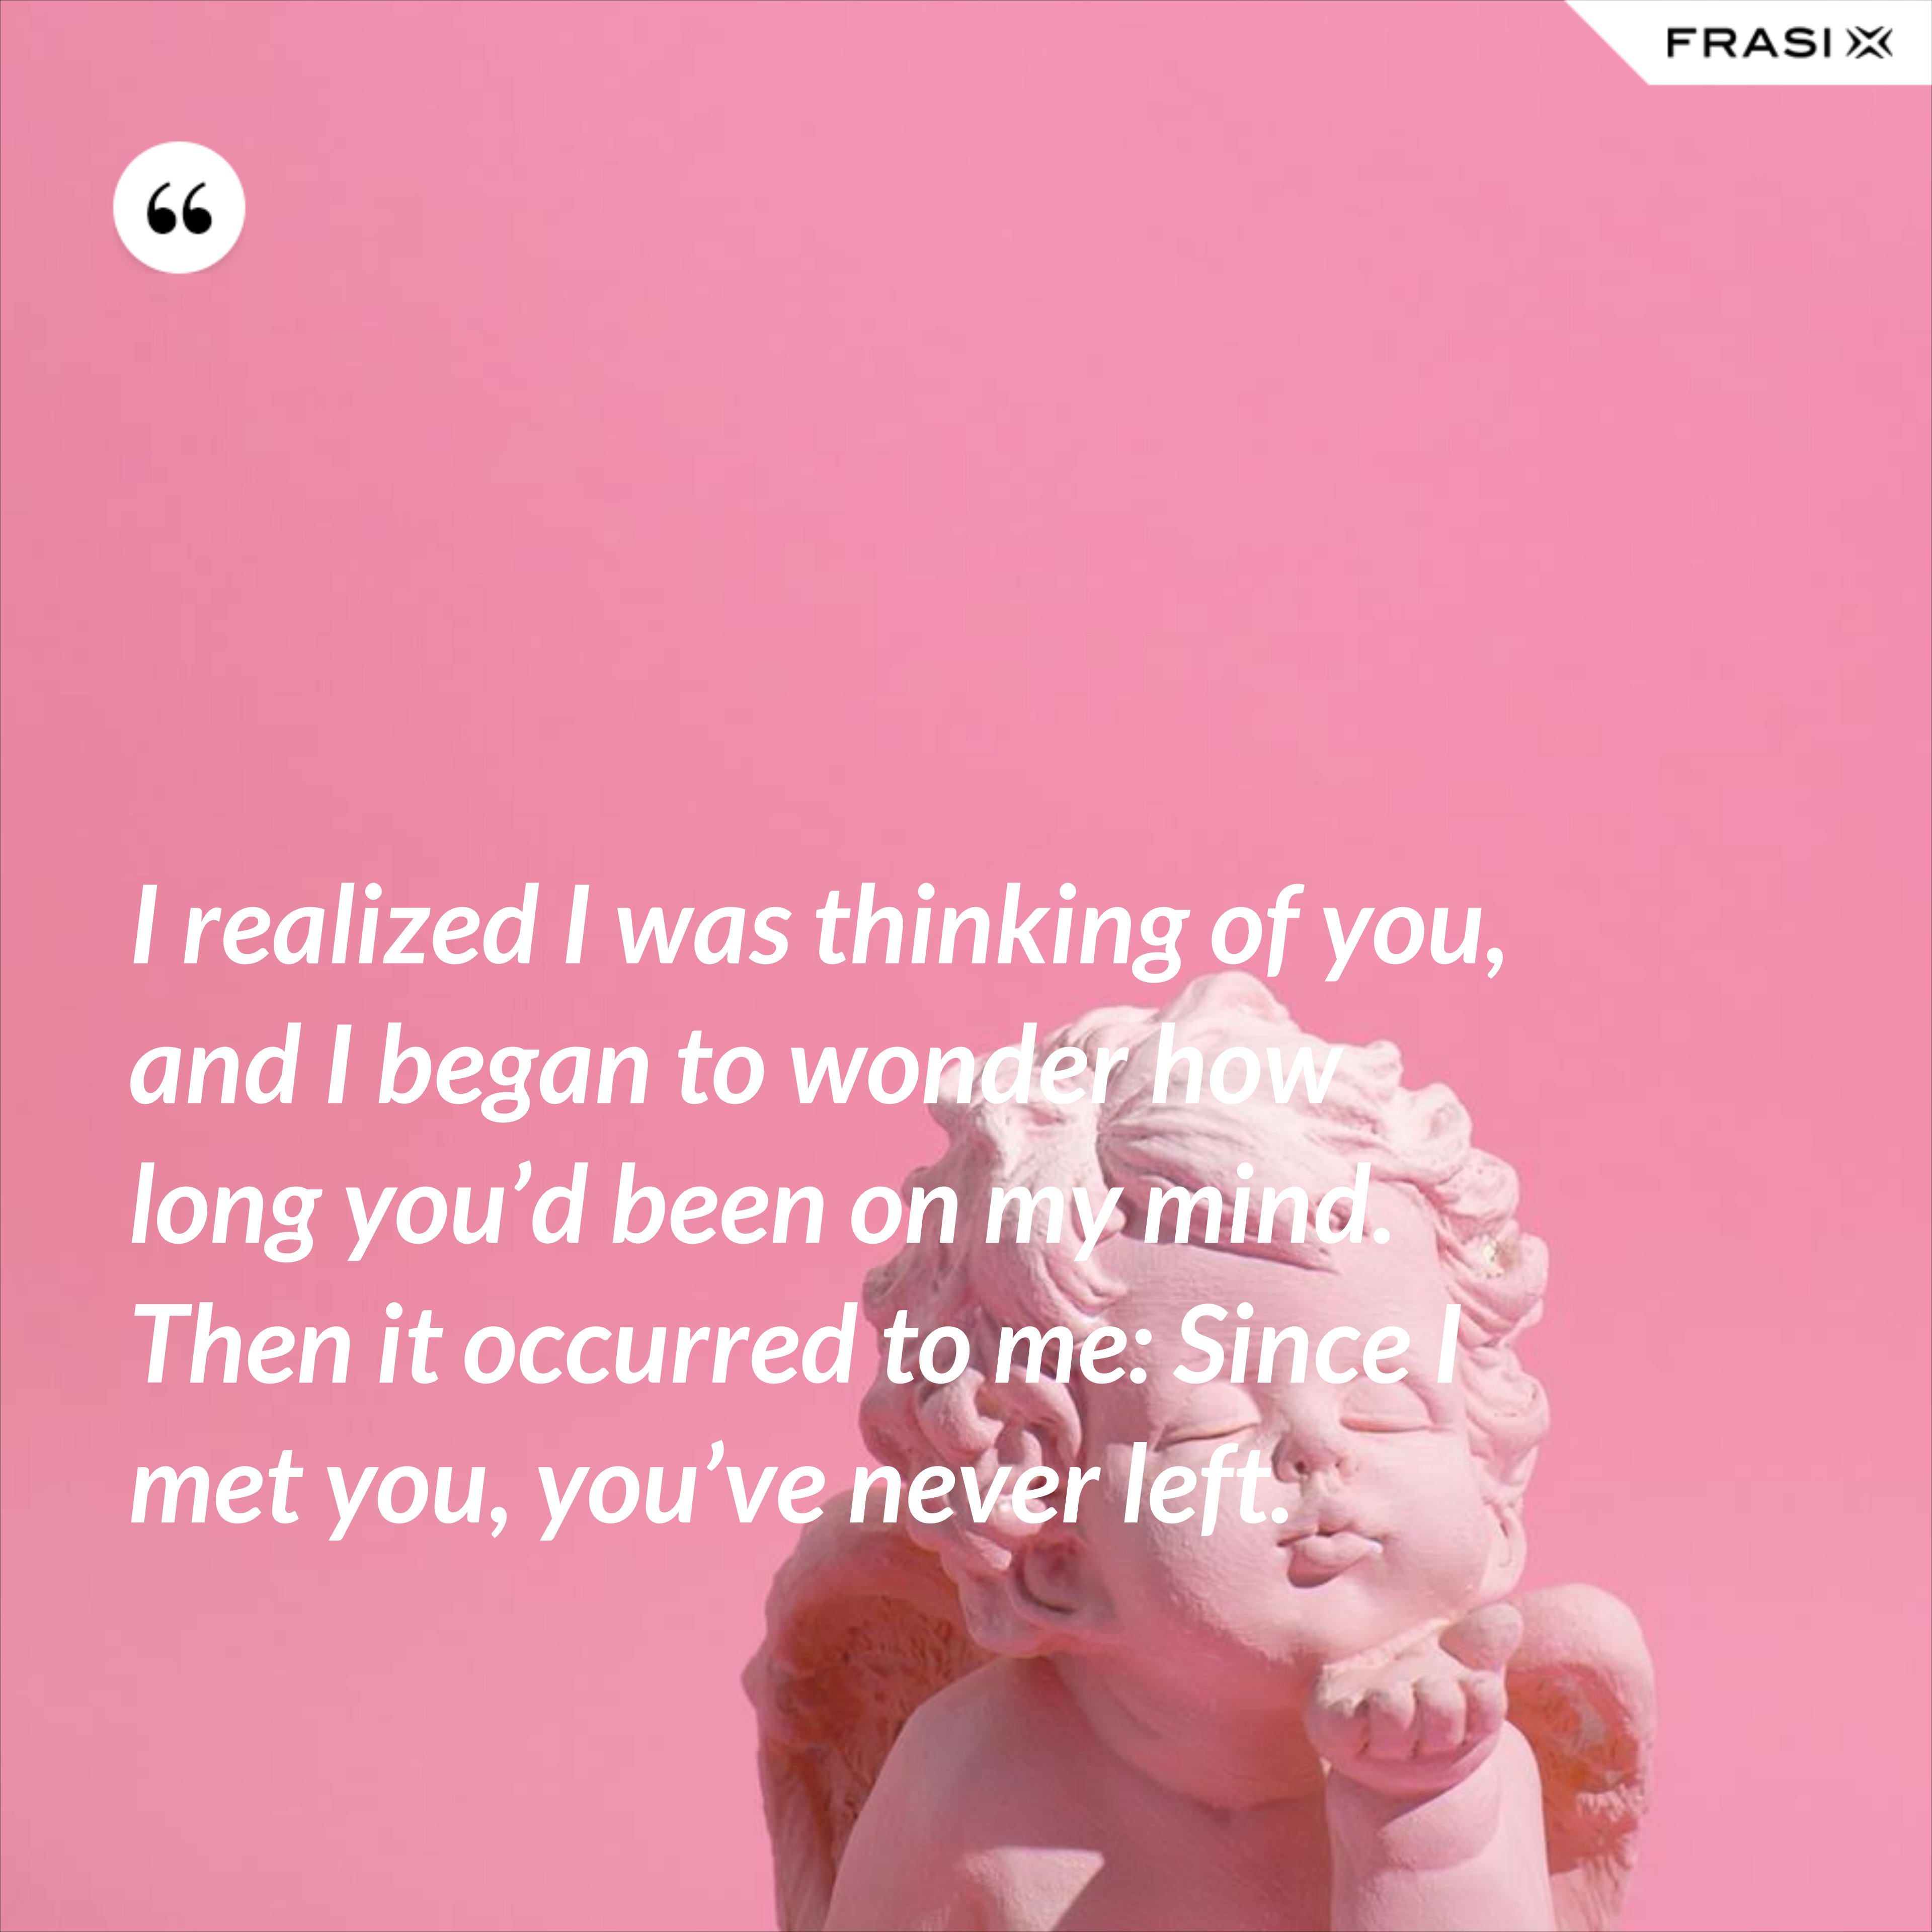 I realized I was thinking of you, and I began to wonder how long you’d been on my mind. Then it occurred to me: Since I met you, you’ve never left. - Anonimo